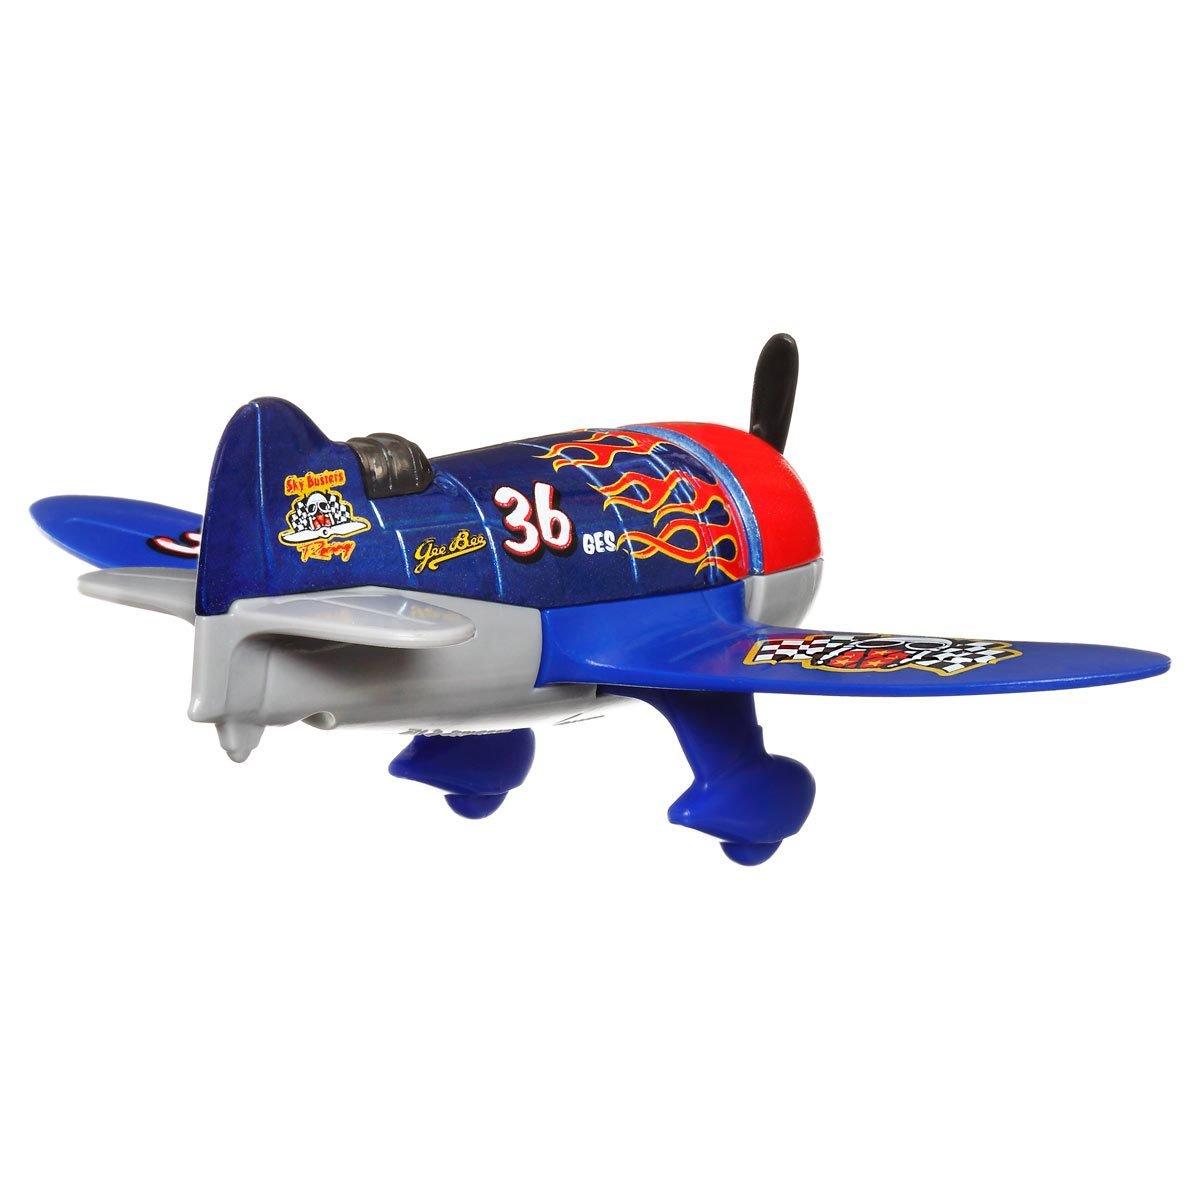 Matchbox 2022 Sky Busters Gee Bee 25/33 - BumbleToys - 2-4 Years, 5-7 Years, Boys, Collectible Vehicles, MatchBox, Pre-Order